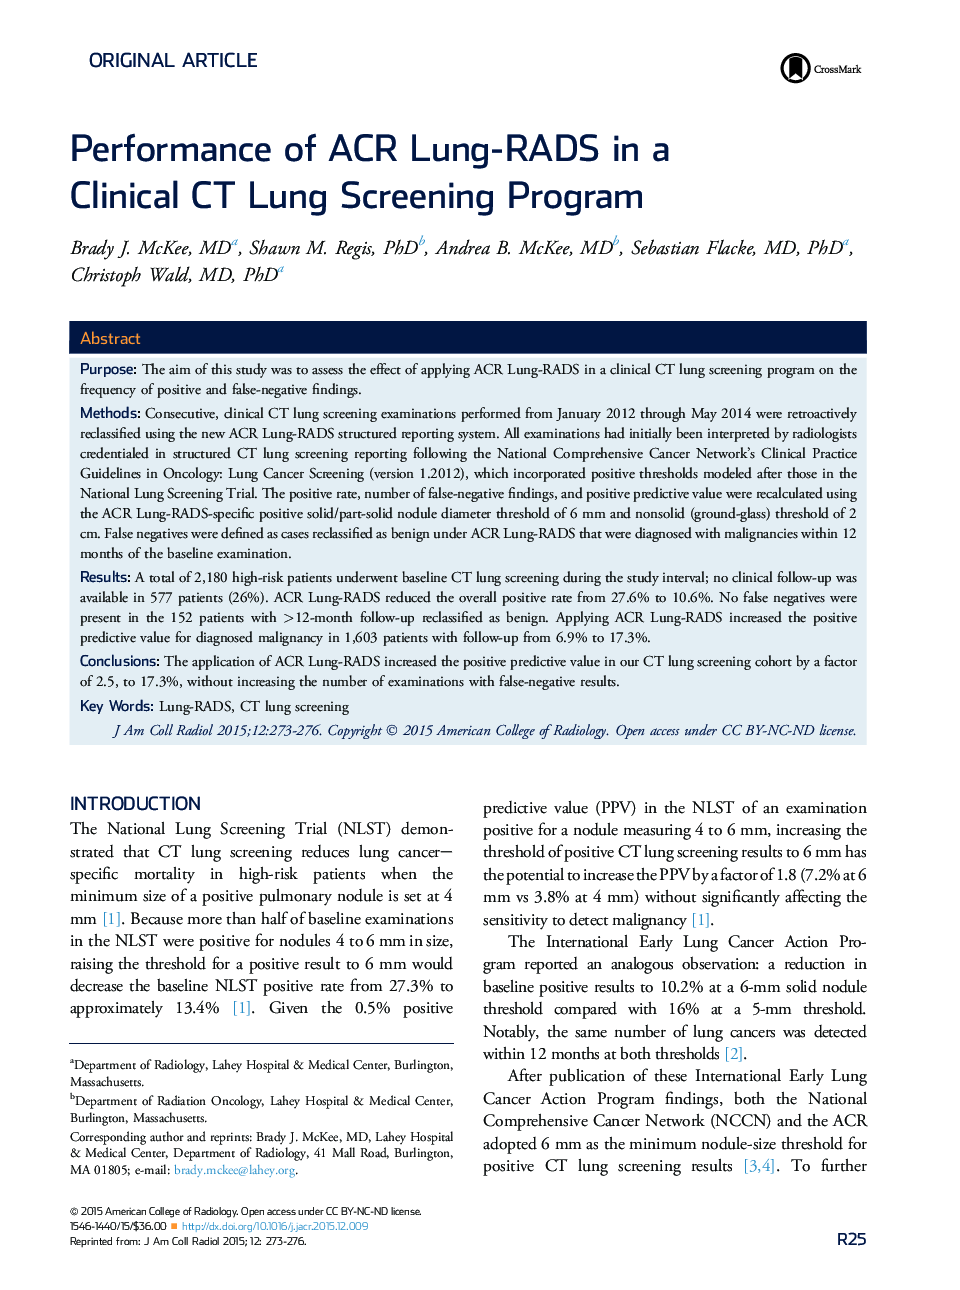 Performance of ACR Lung-RADS in a Clinical CT Lung Screening Program